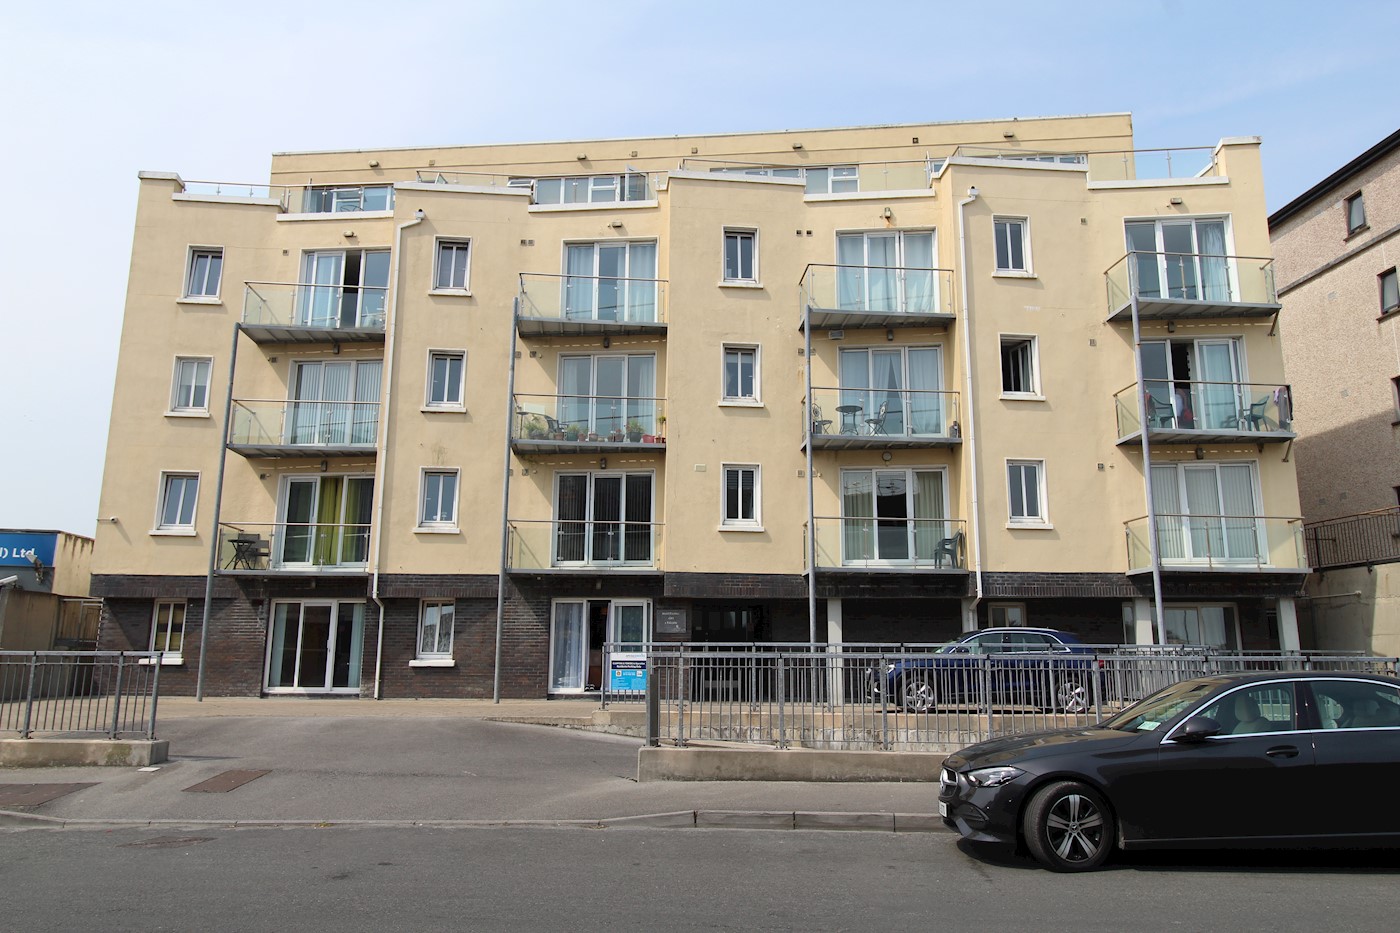 Apartment 4, Radharc An Chlair, Salthill, Co. Galway, H91A2V9 1/10